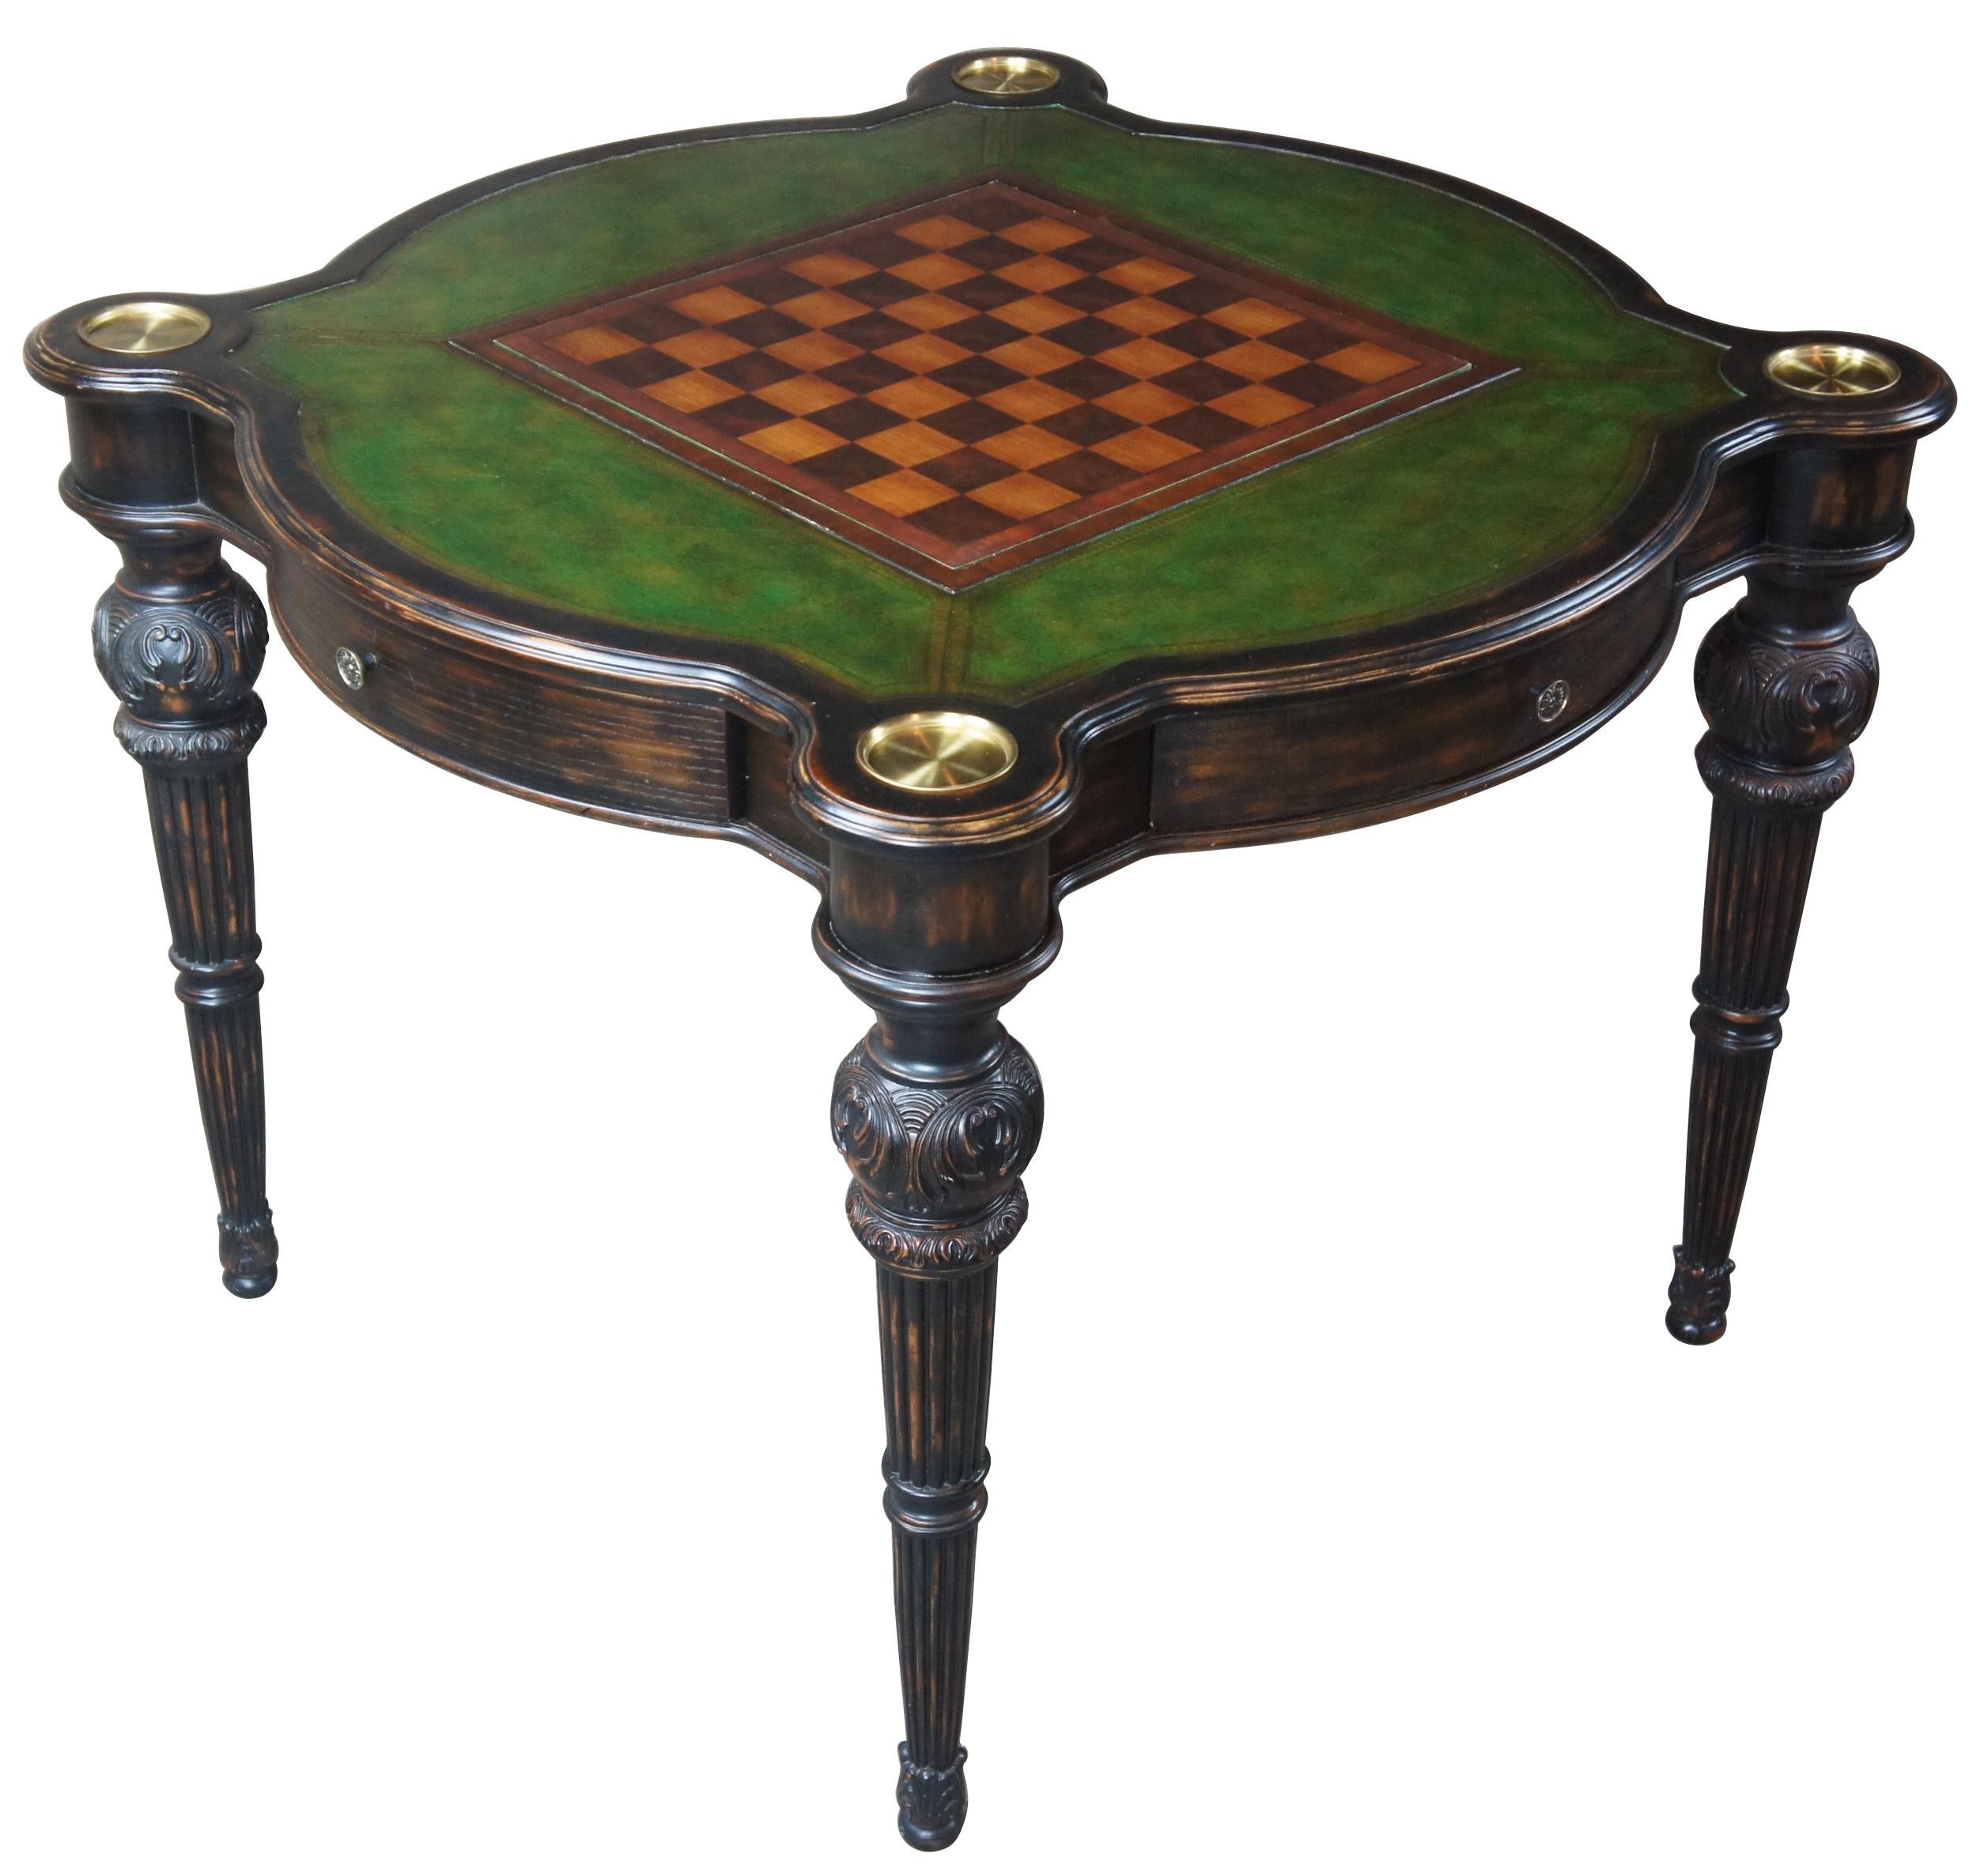 Traditional green tooled leather top game table cards chess poker

Traditional game / chess table. Finished in black with brown undertones. Features four drawers with French hardware, a green tooled leather top with brass cup holders, multiple